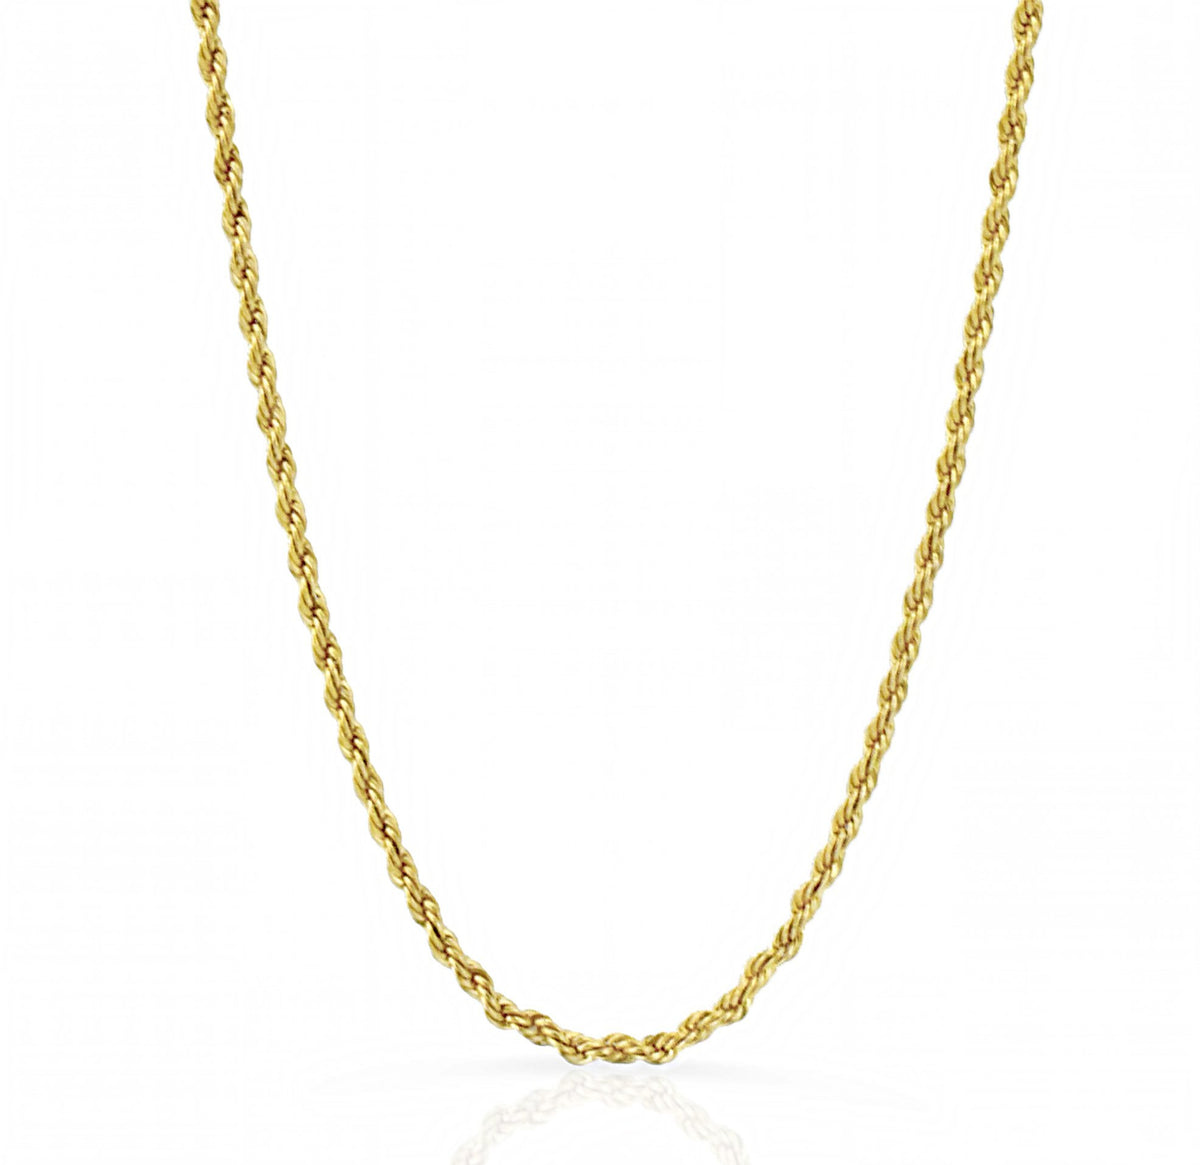 BILLIE THIN GOLD ROPE CHAIN NECKLACE